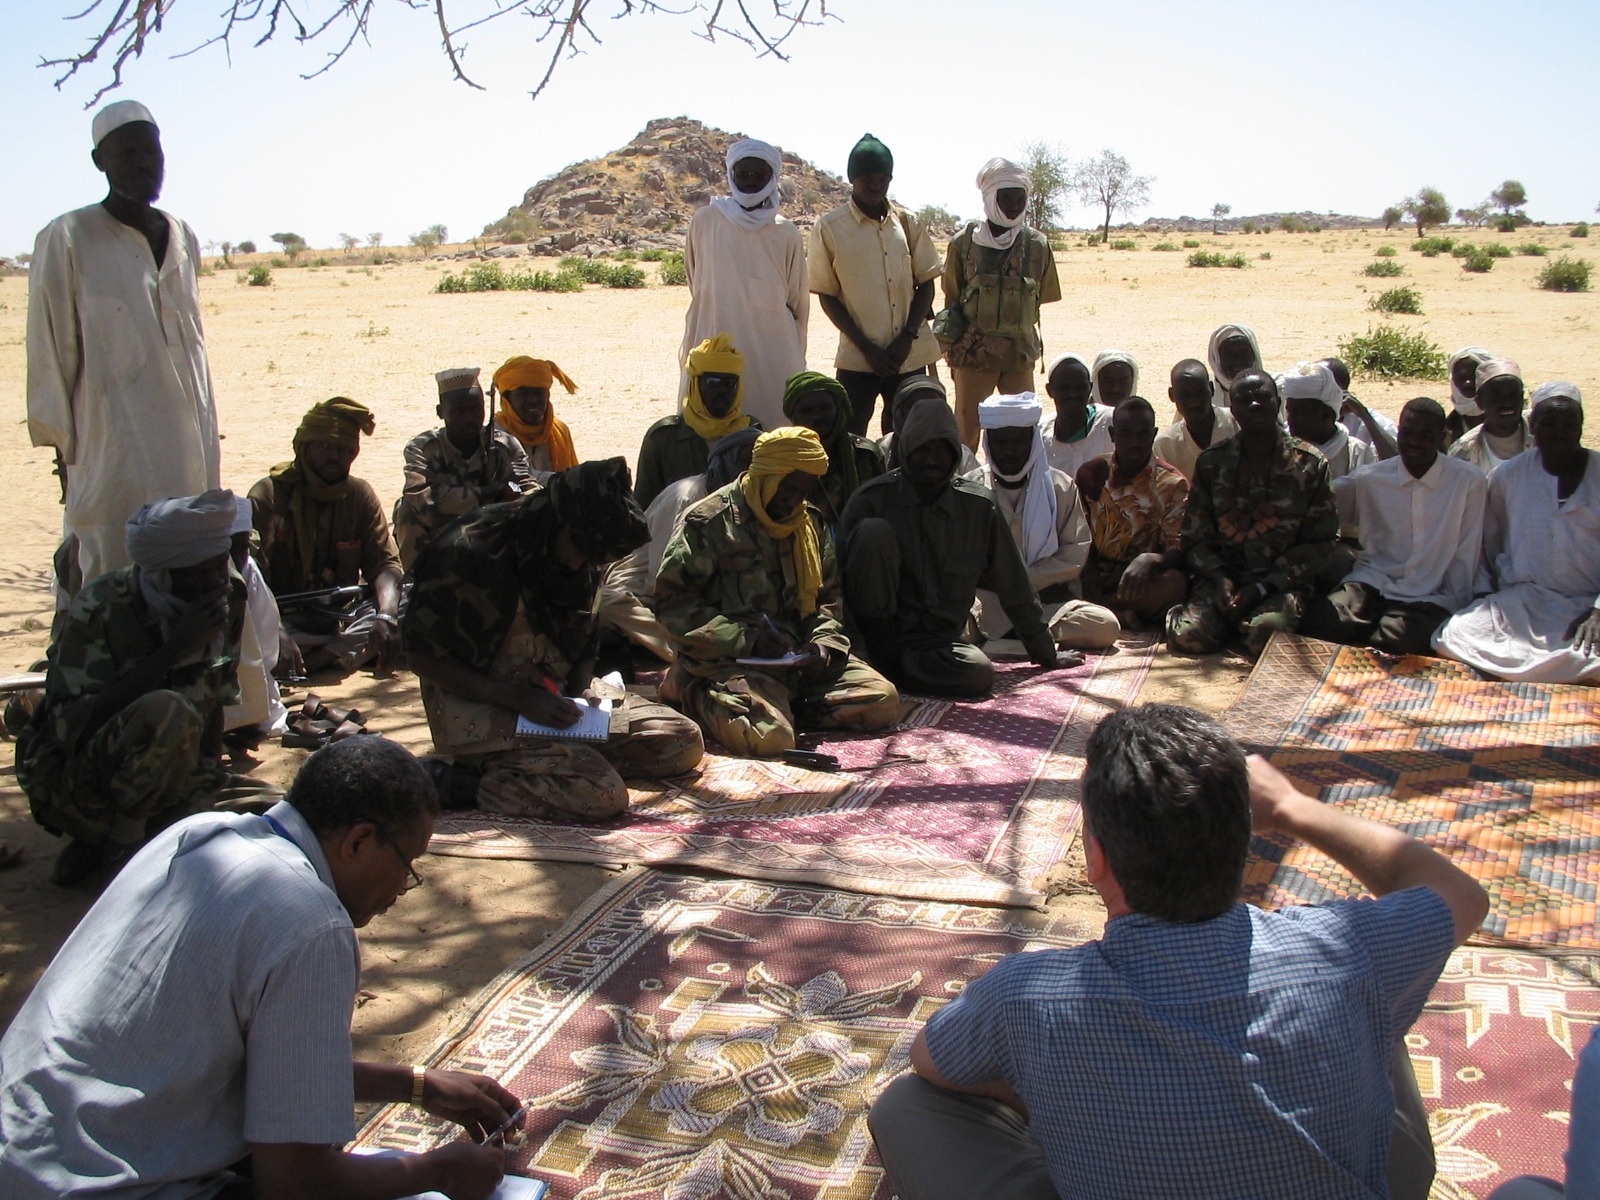 Dialogue with an opposition group and community in Darfur, 2007